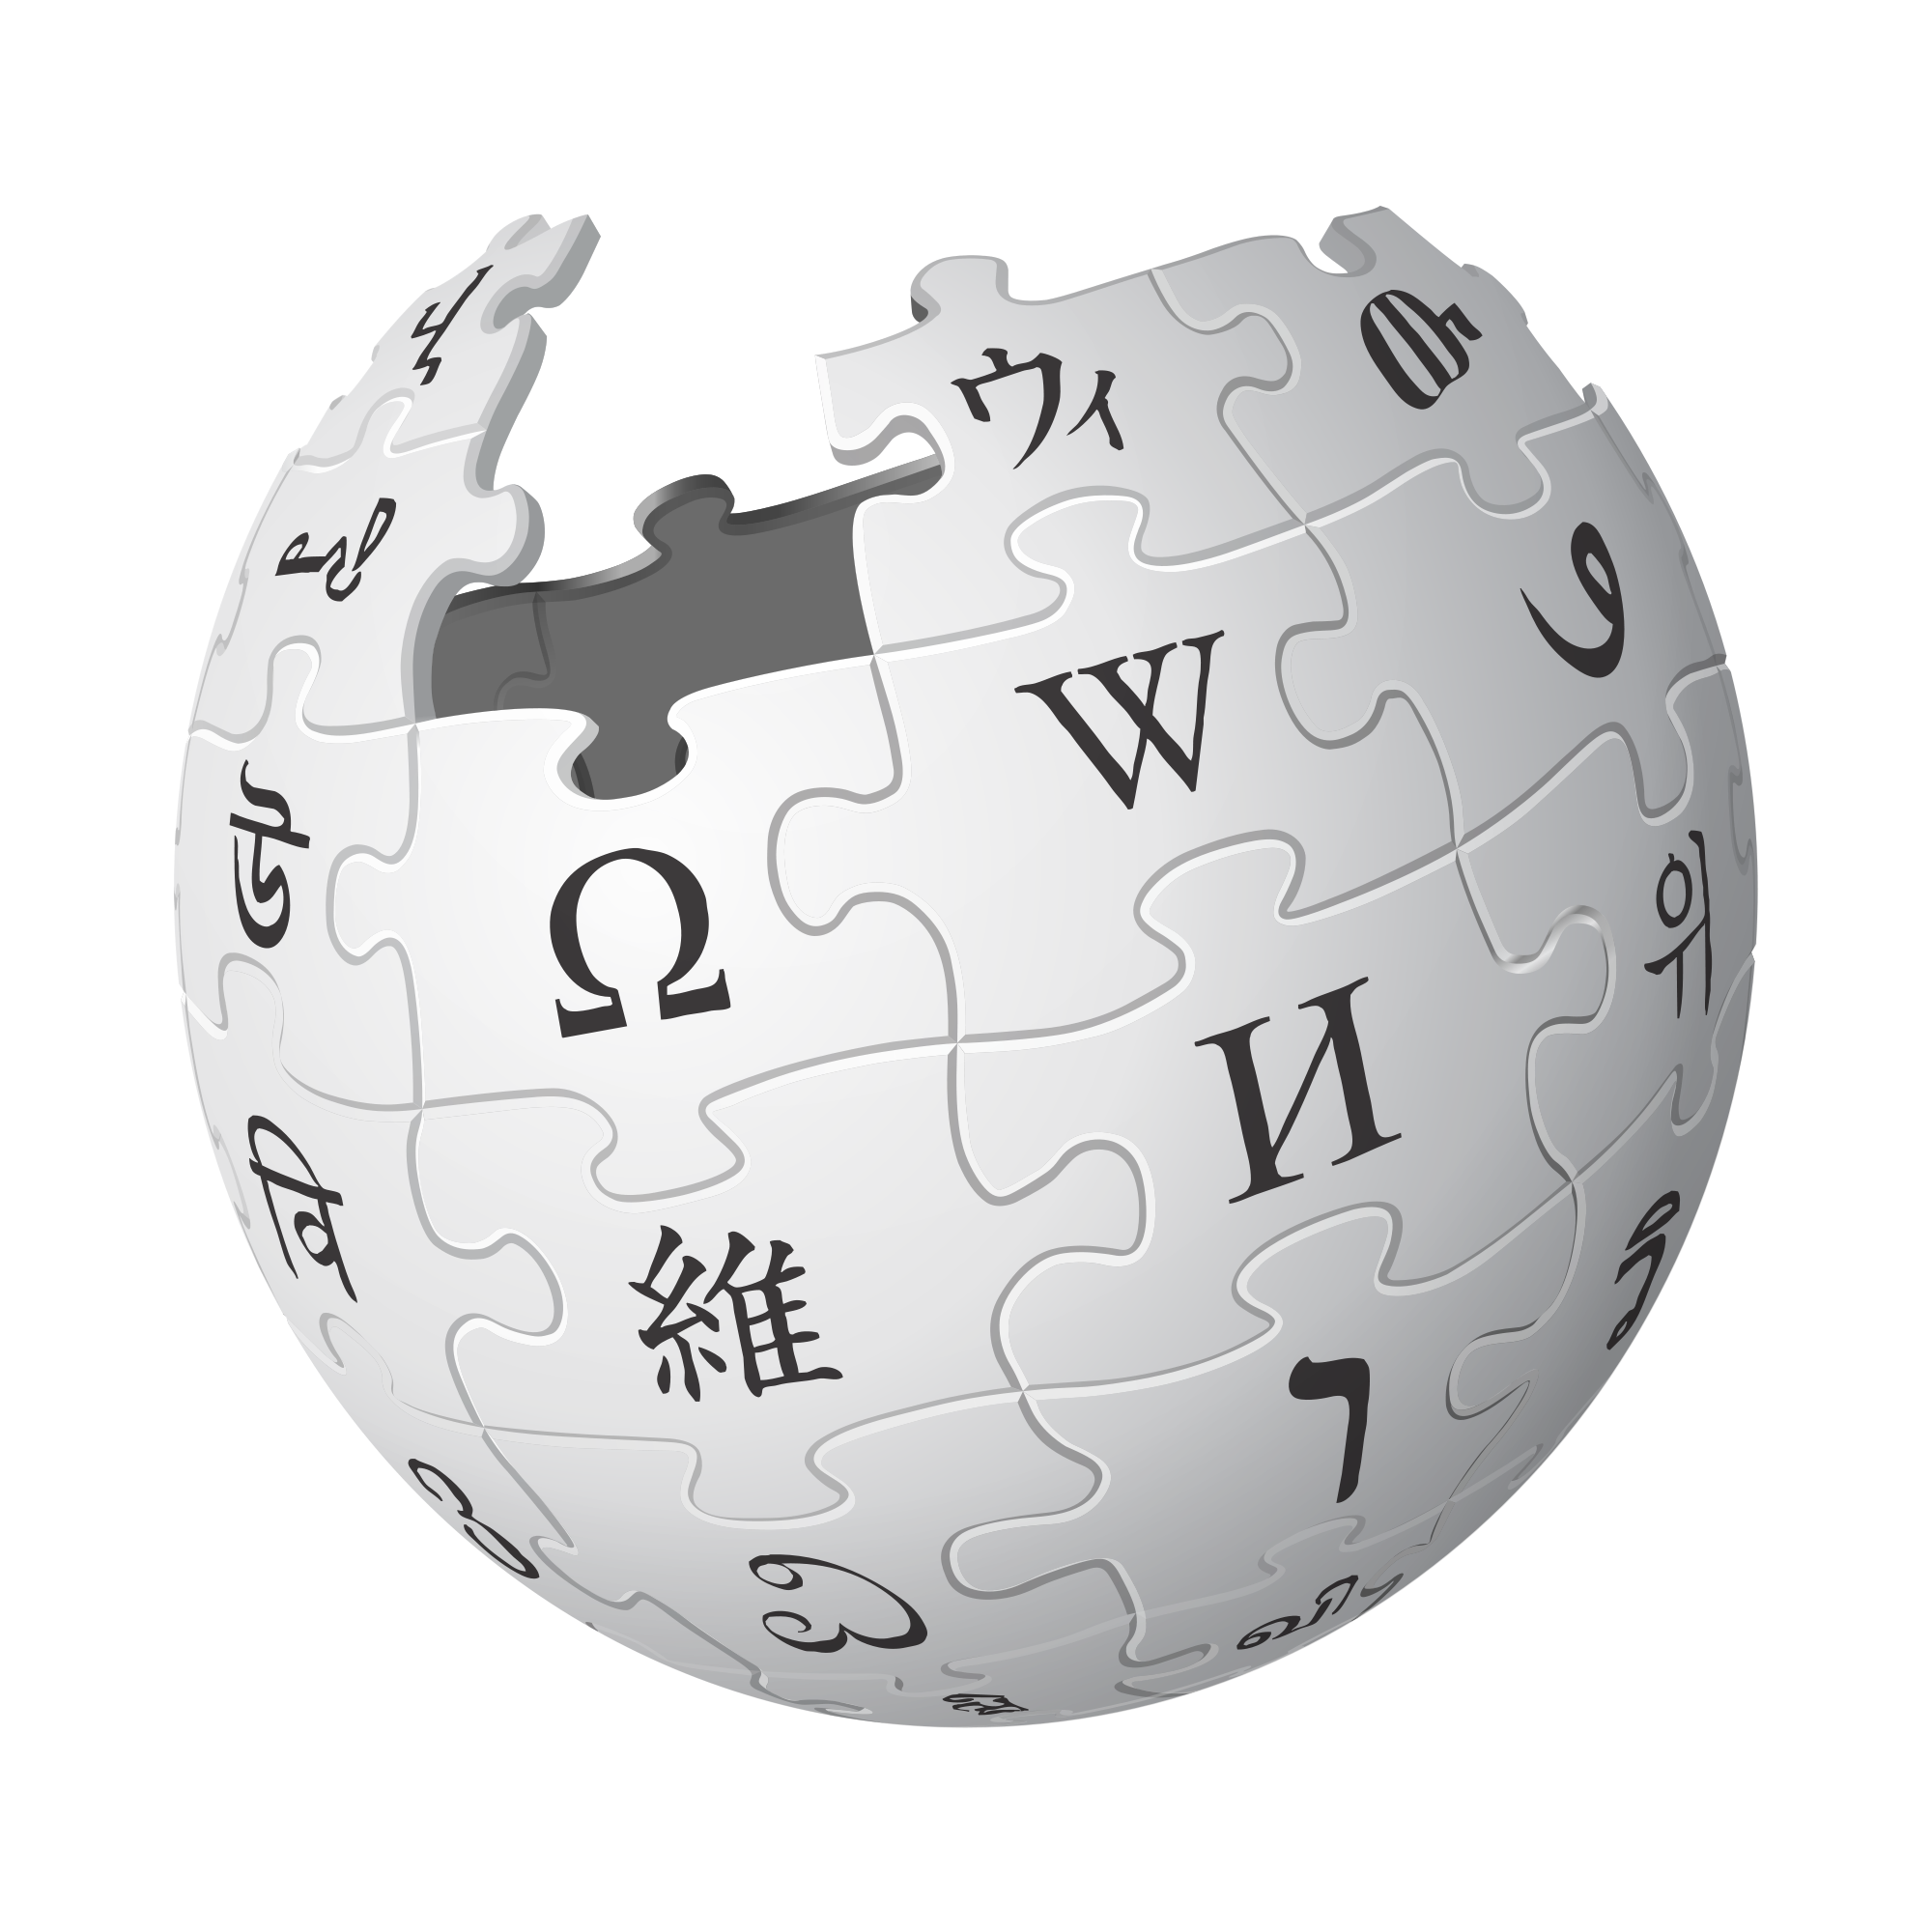 wikipedia-logo-symbol-meaning-history-png-brand